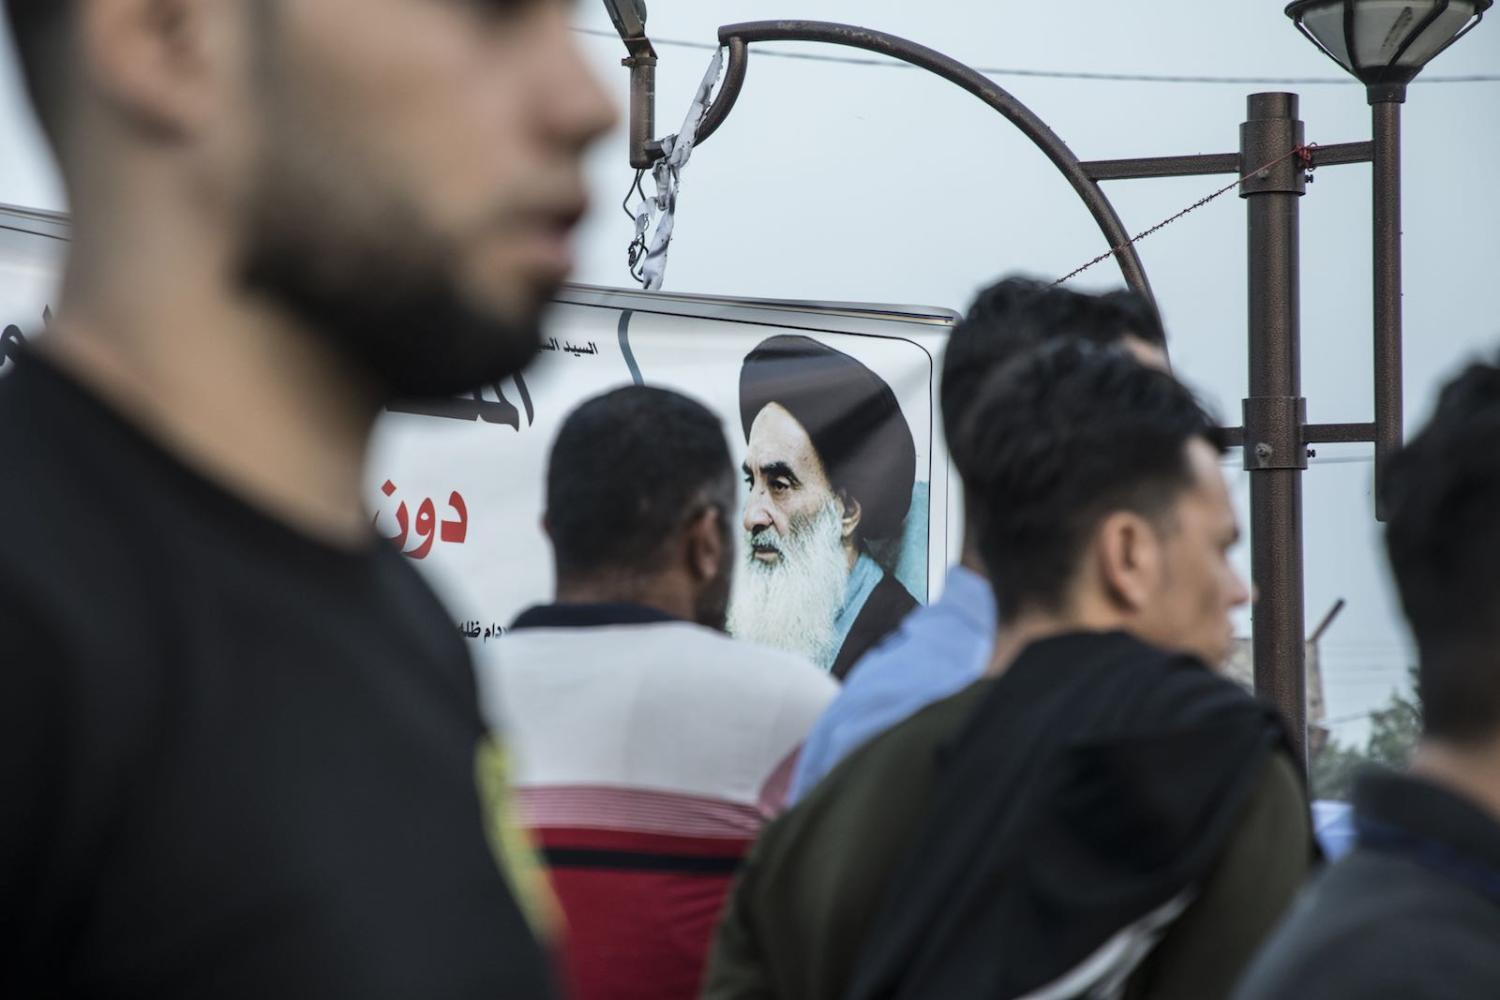 Protestors in front of the governorate in Basra, Iraq, and a billboard of Shia leader Ali Al-Sistani, 16 November (Photo: Laurent Van der Stockt/Le Monde/Getty Images)